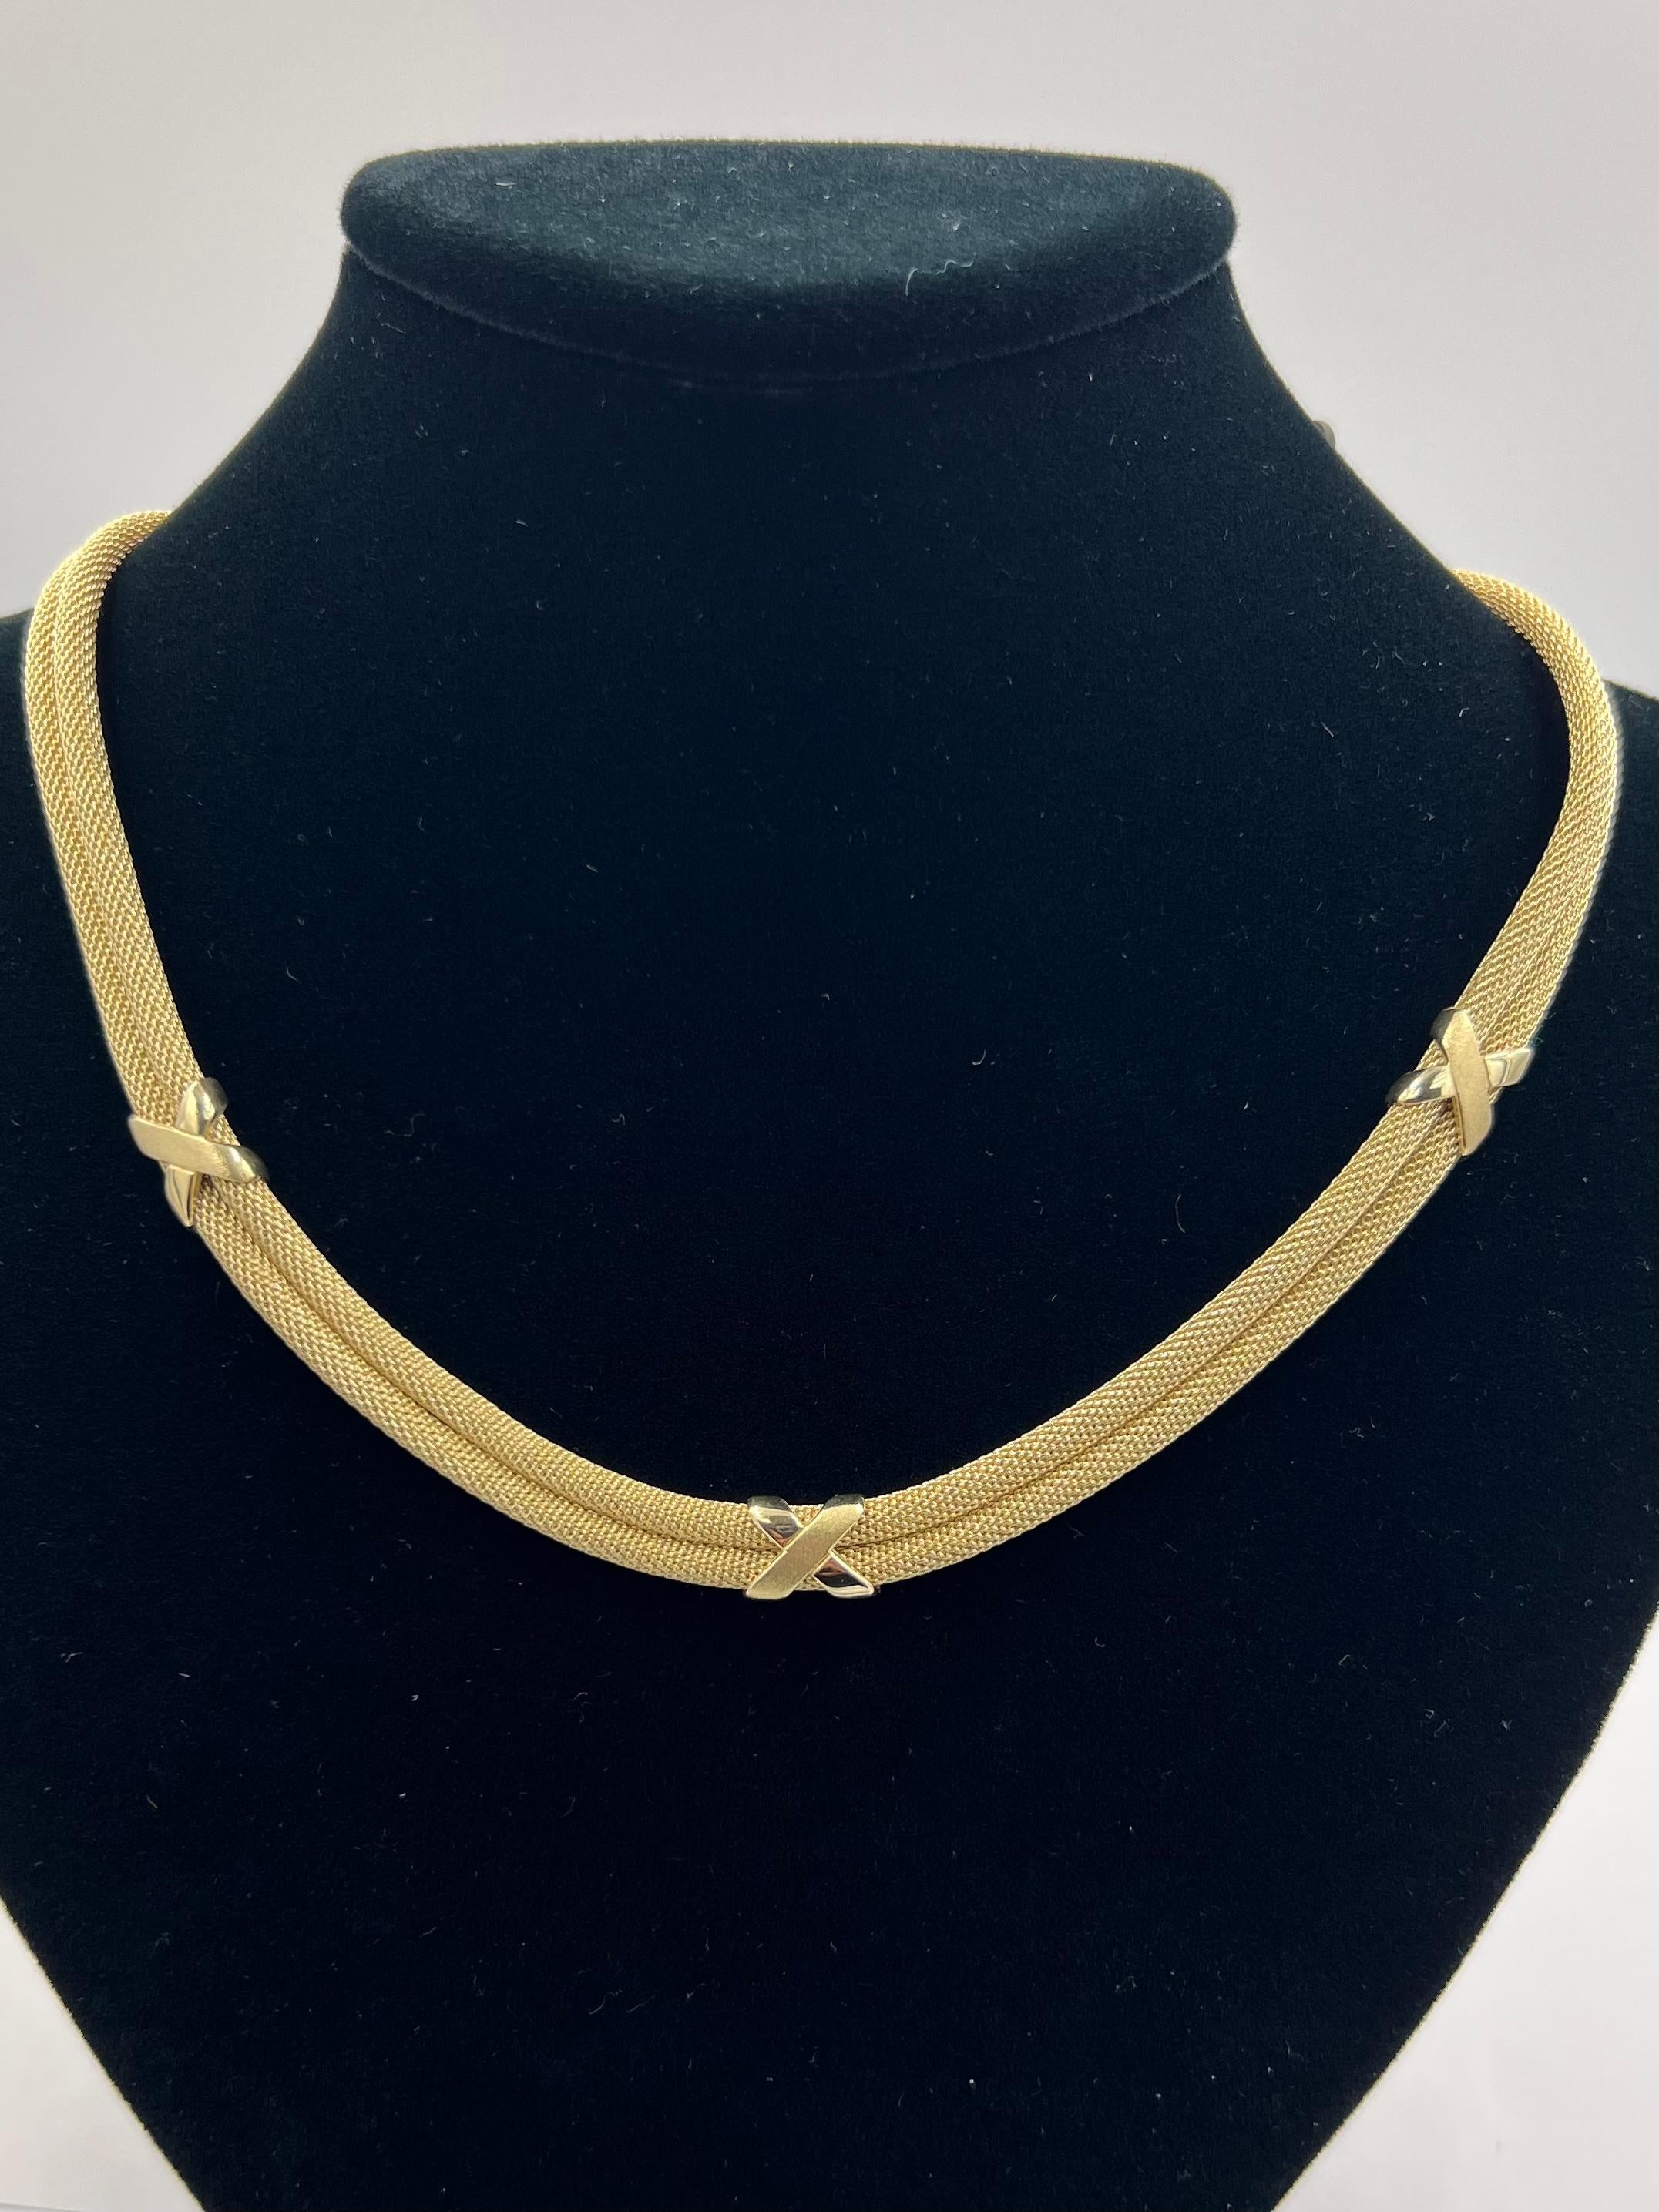  Two Row Mesh Yellow Gold Necklace, 1990s.

 ABOUT THIS ITEM: N-DJ818D     This contemeporary Italian necklace is made of two rows of rounded mesh connected together with three scattered X patten designs florentined and shiny.  Very supple and easy